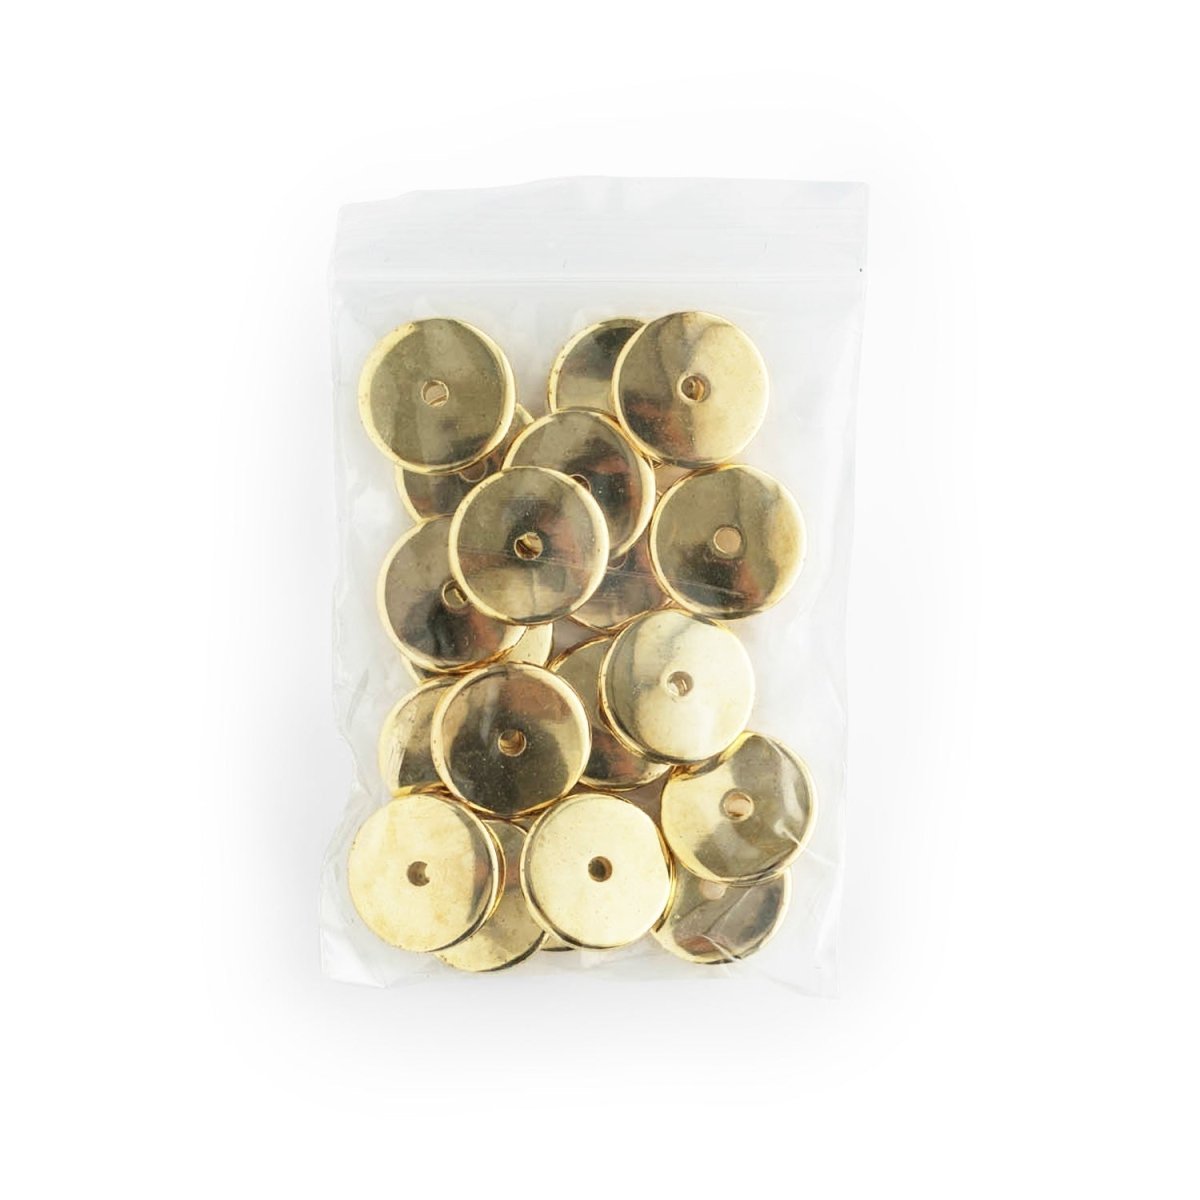 Spacer Beads Flat Disc 18mm Gold from Cara & Co Craft Supply